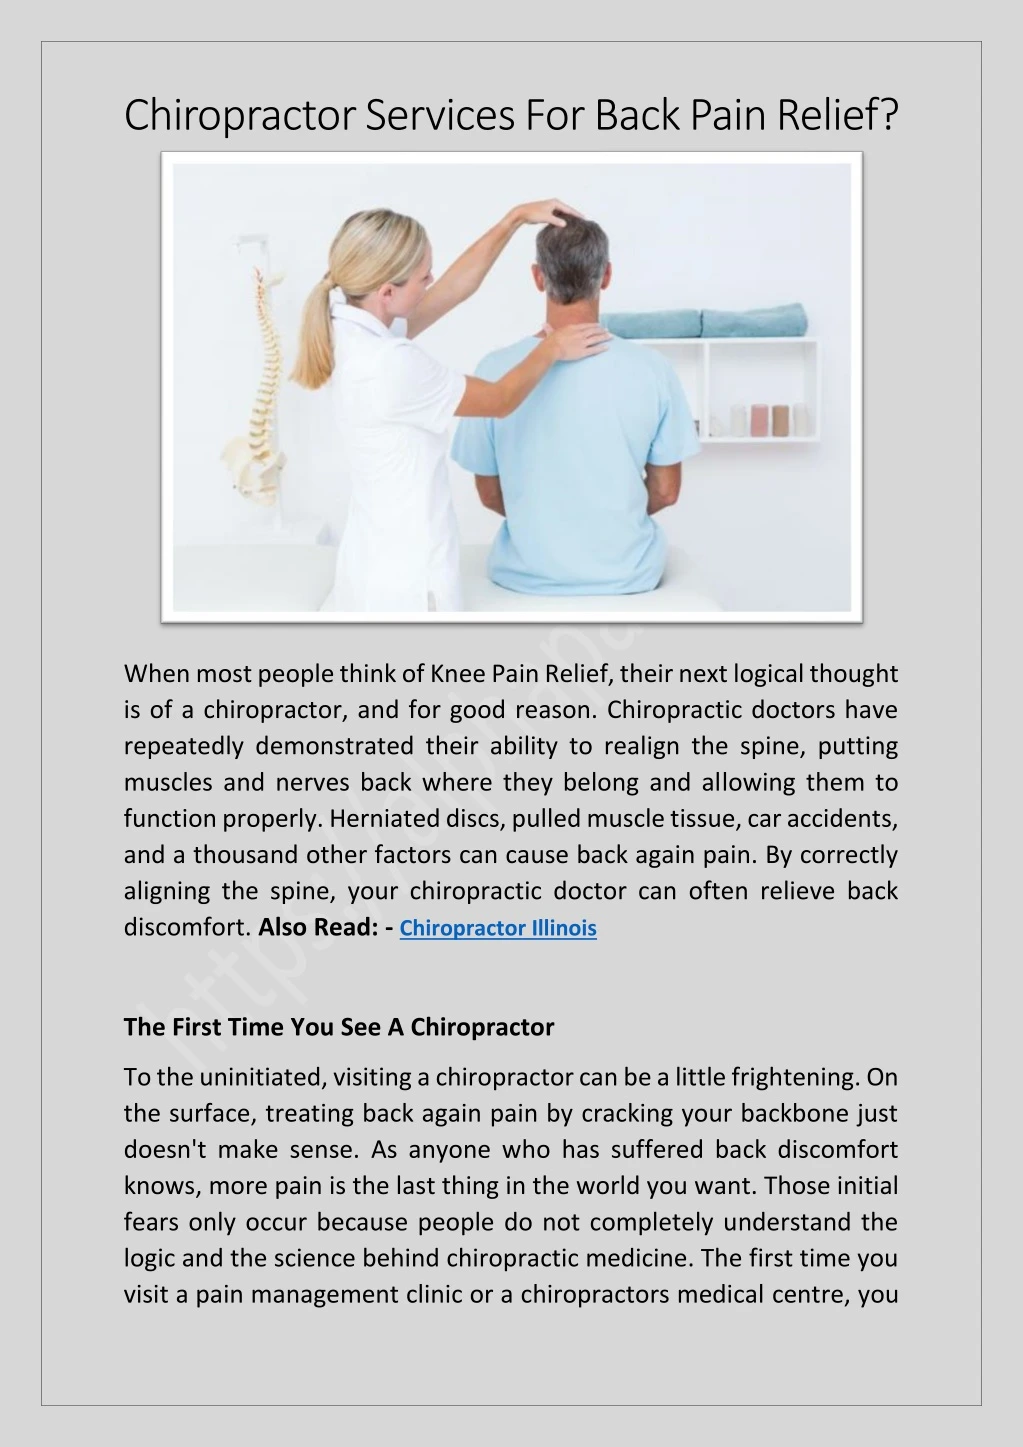 chiropractor services for back pain relief